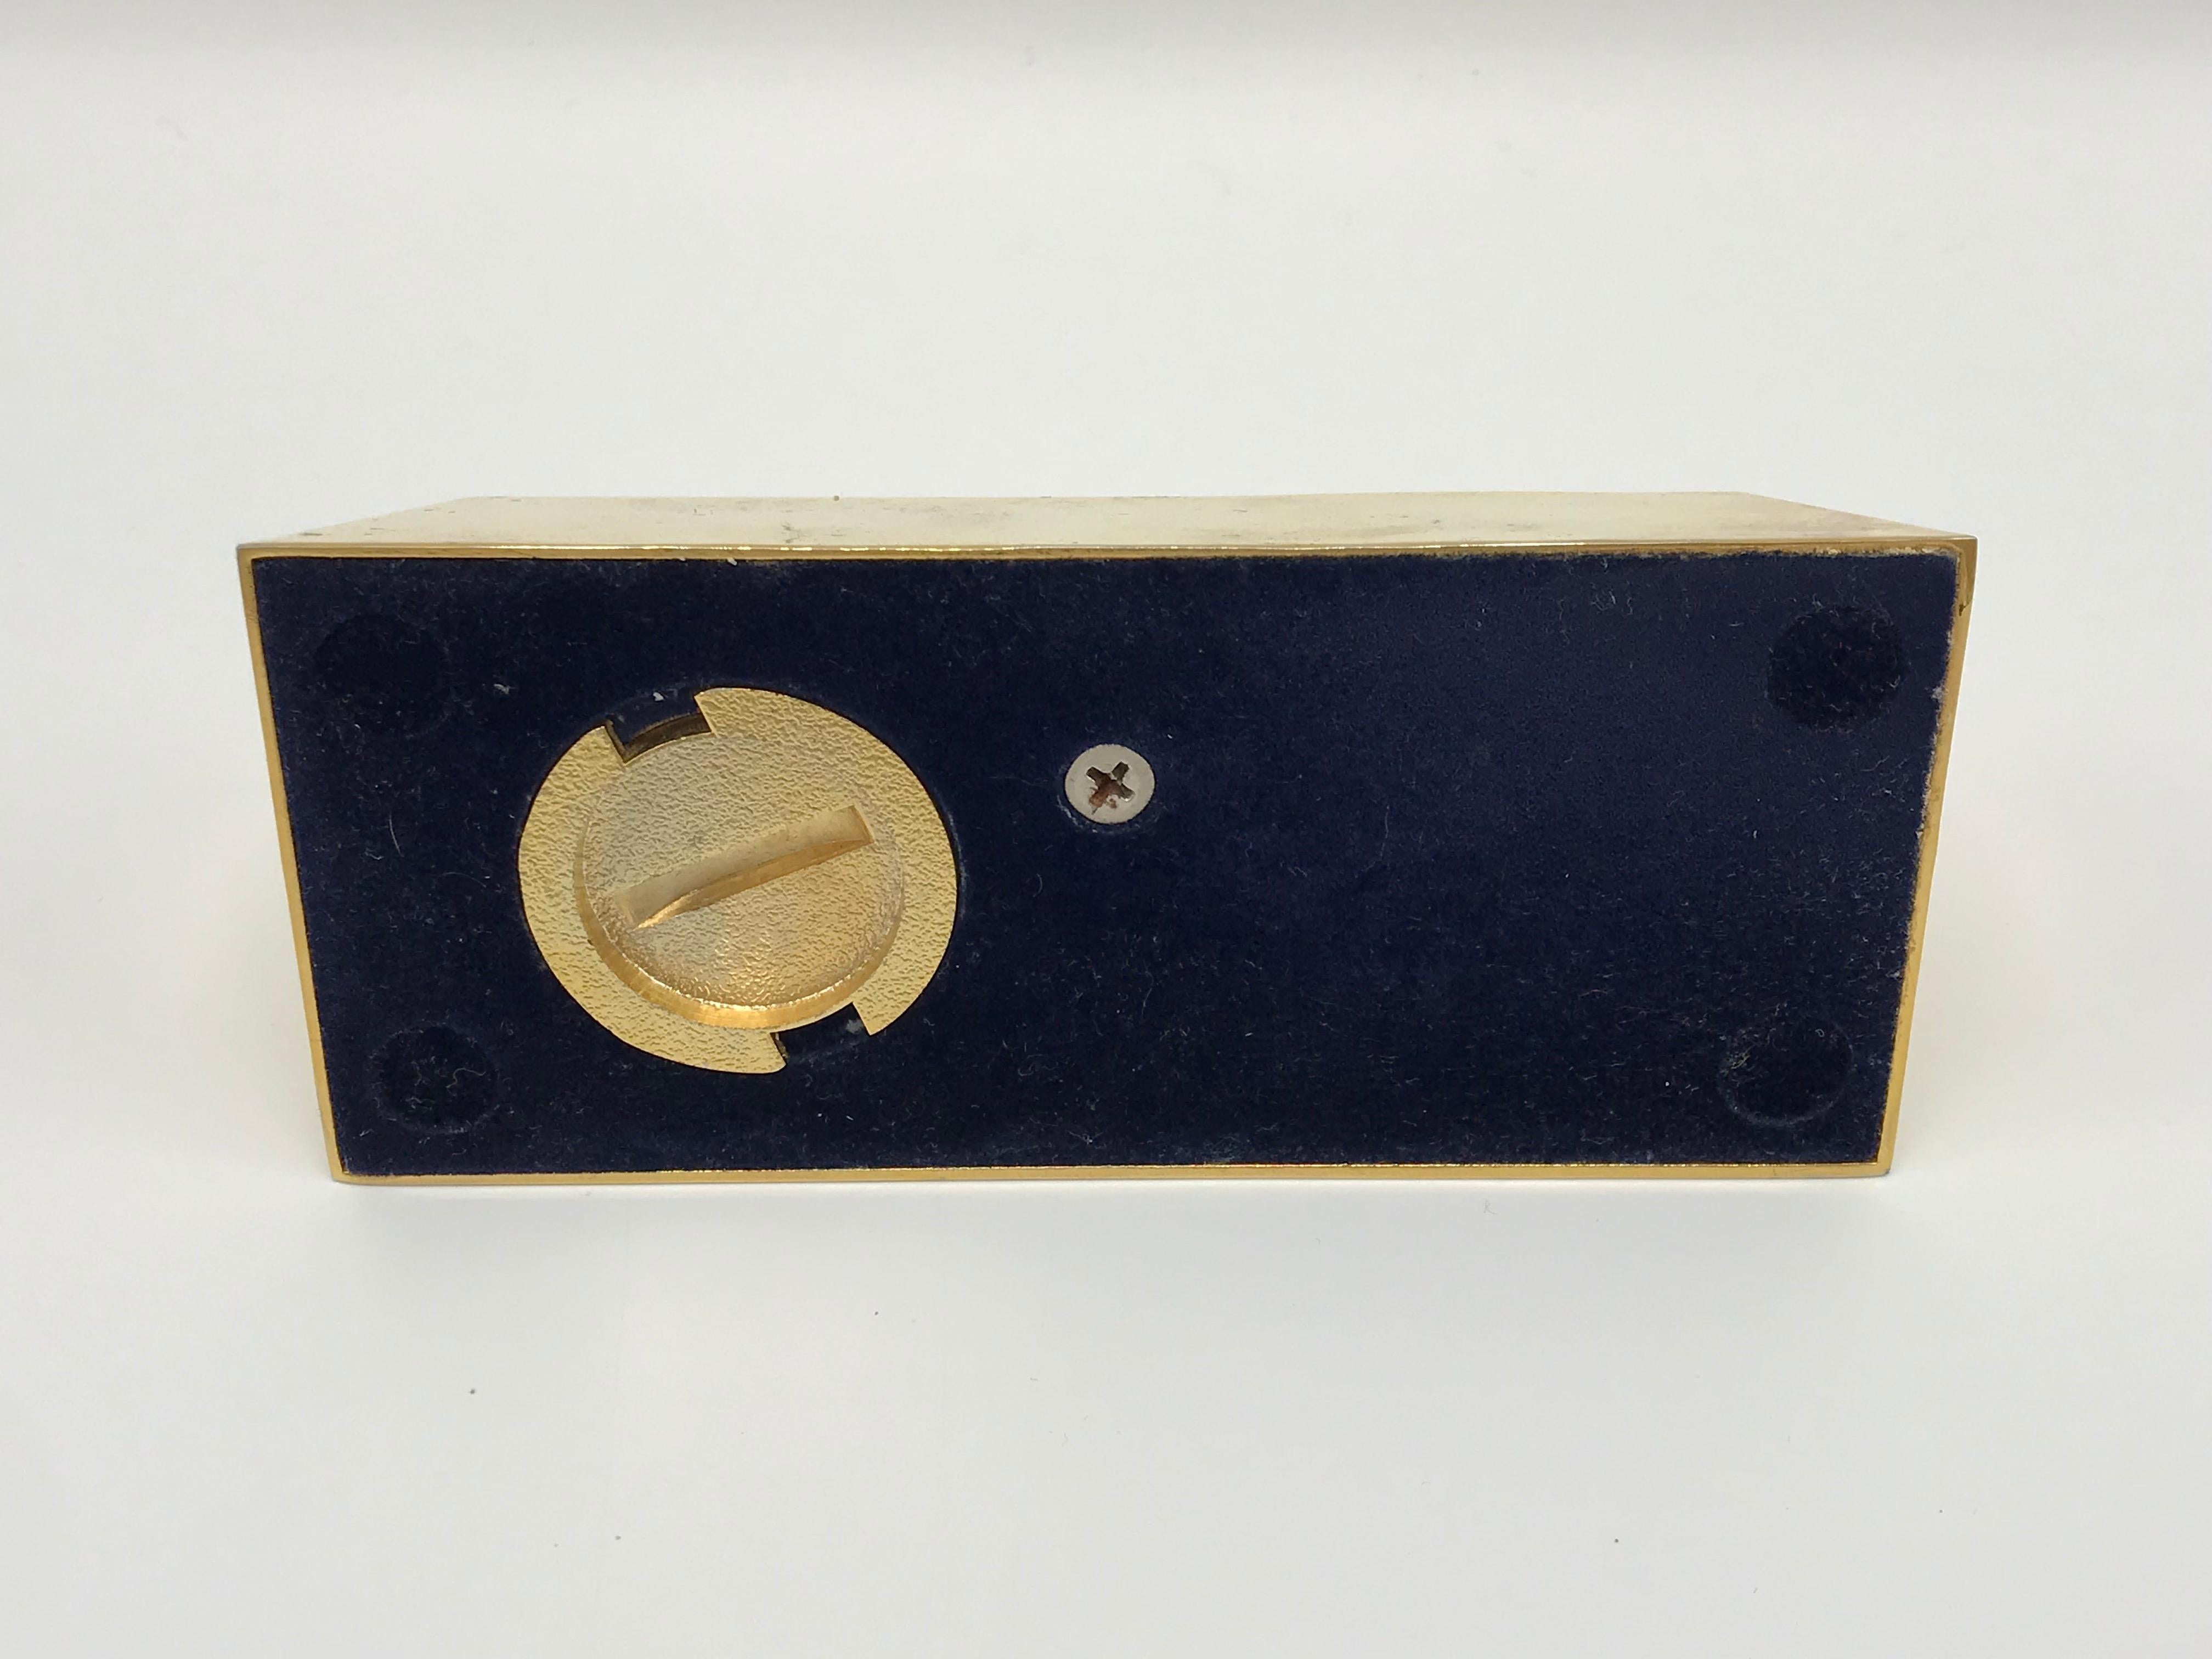 1980s Neiman Marcus Gold-Plated Brick Desktop Bank In Good Condition For Sale In Richmond, VA